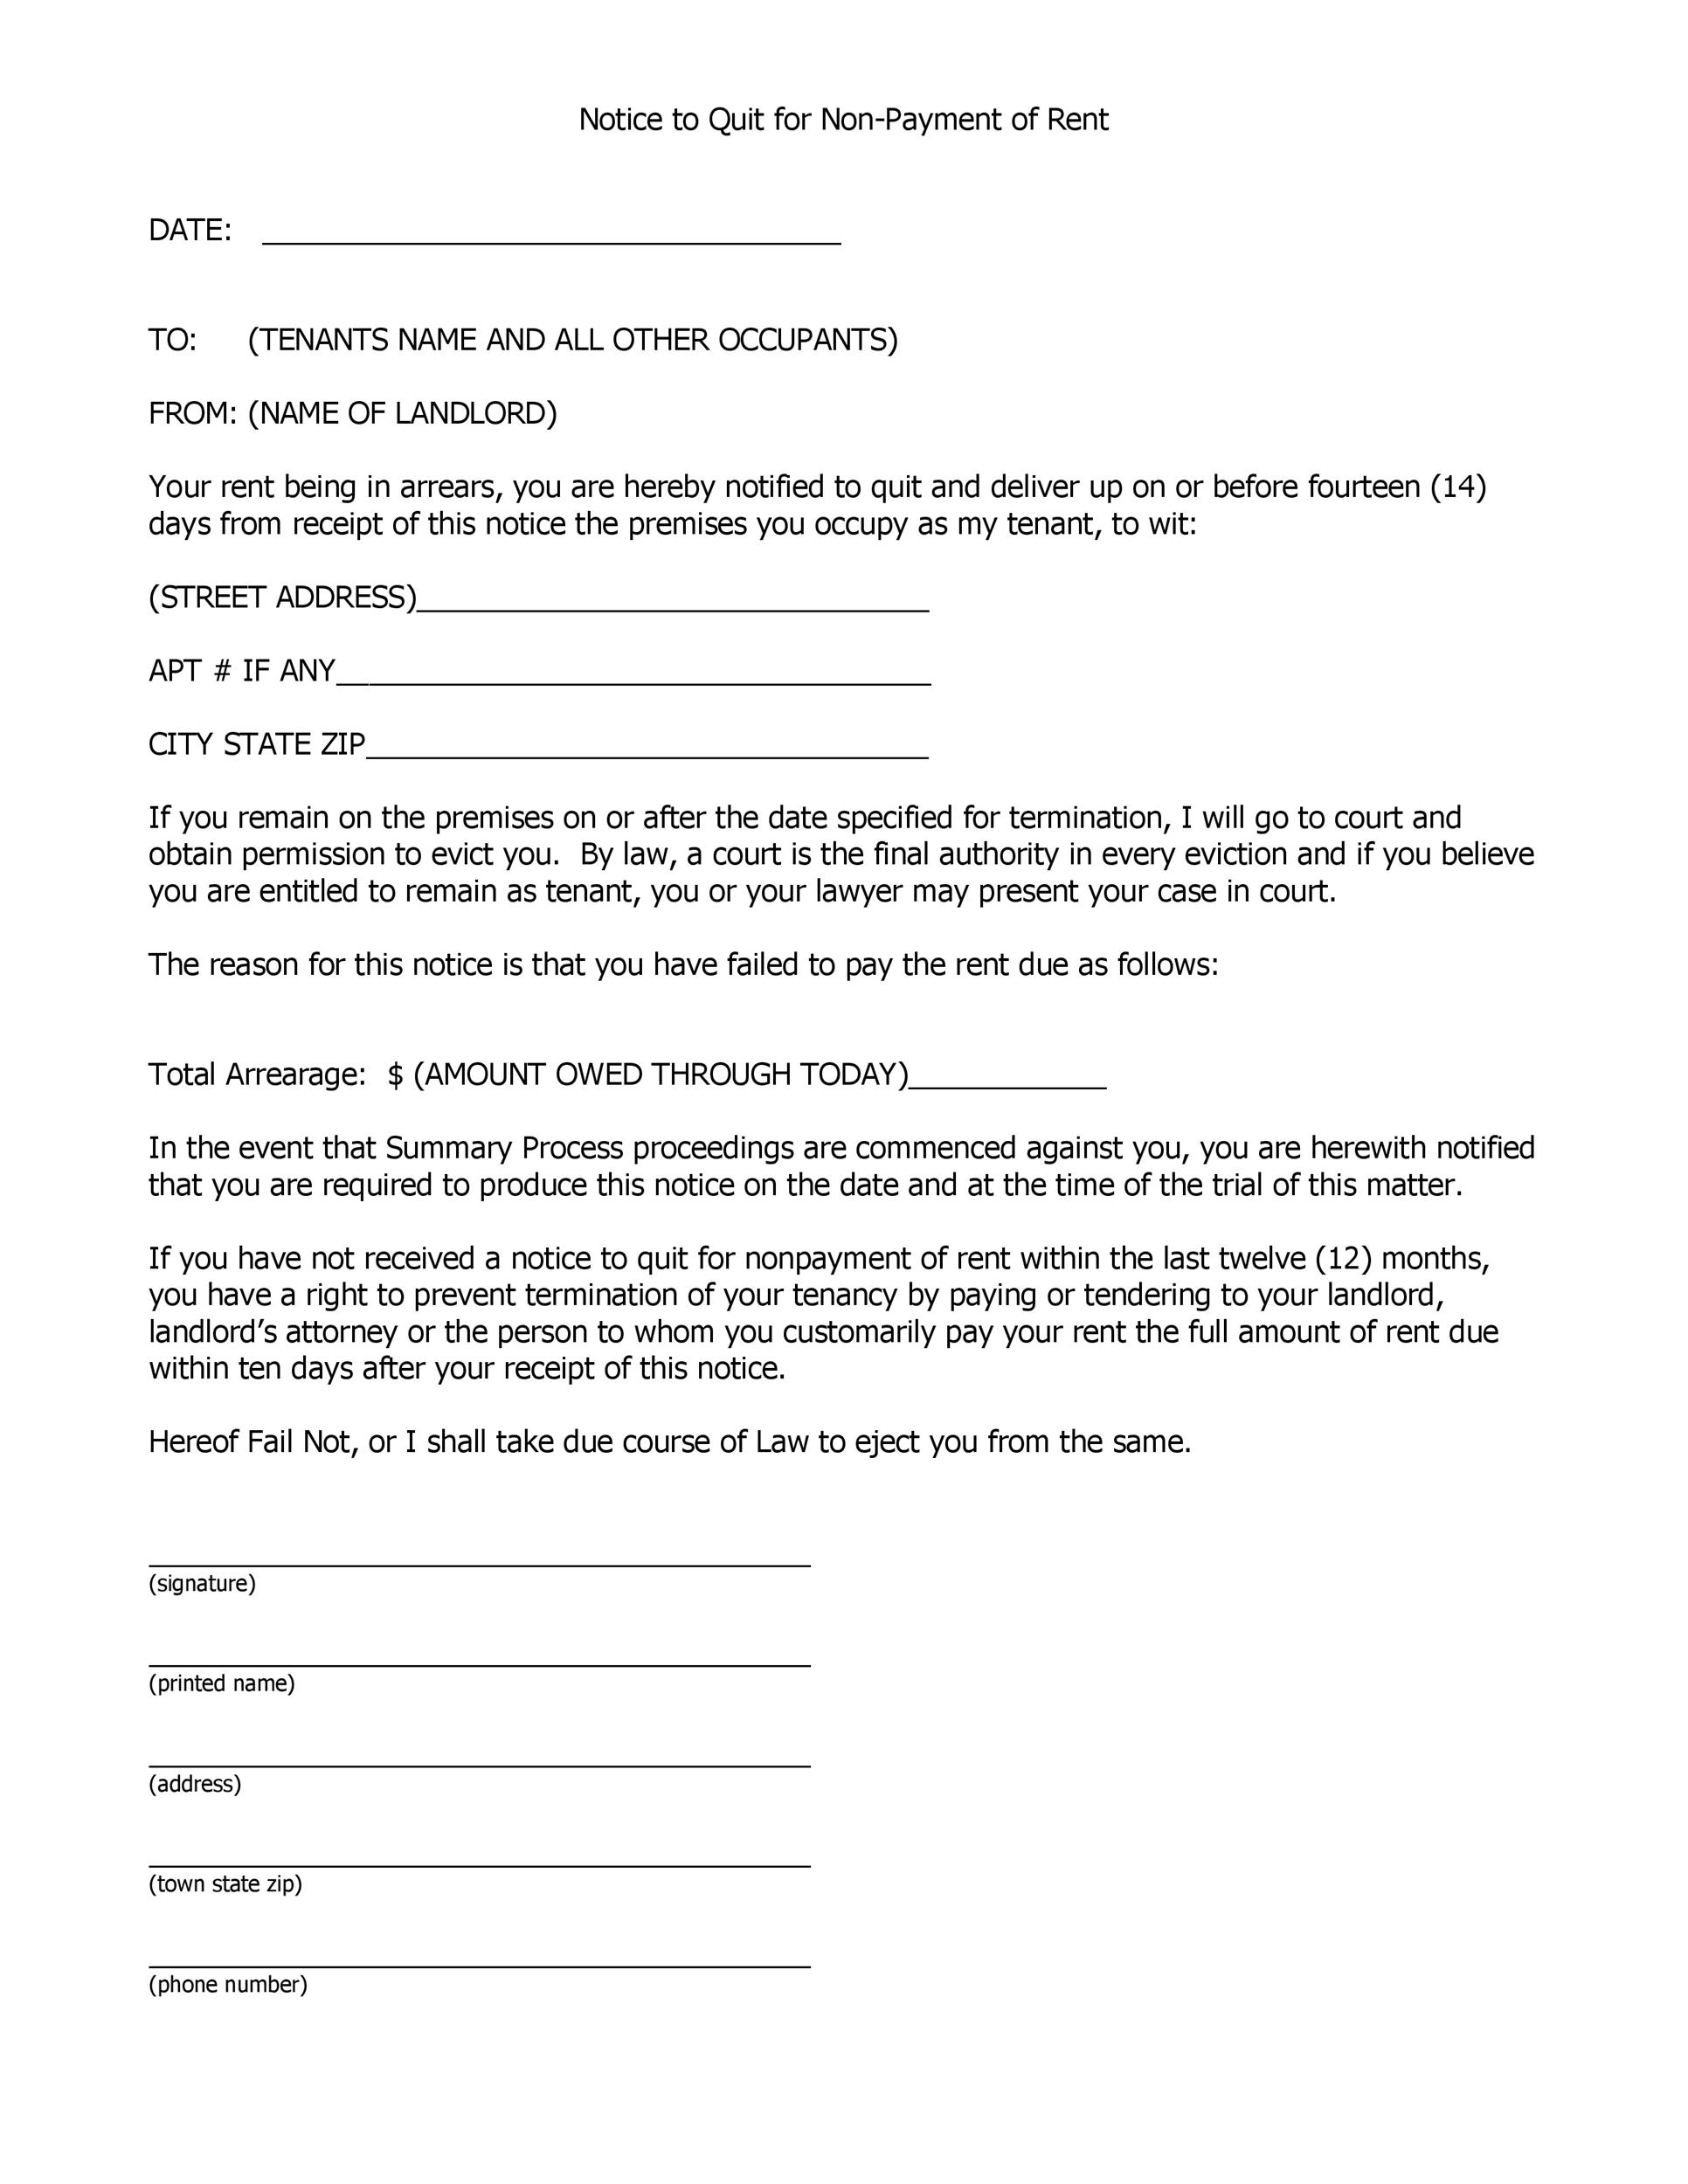 Sample Letter For Nonpayment Of Rent from templatelab.com